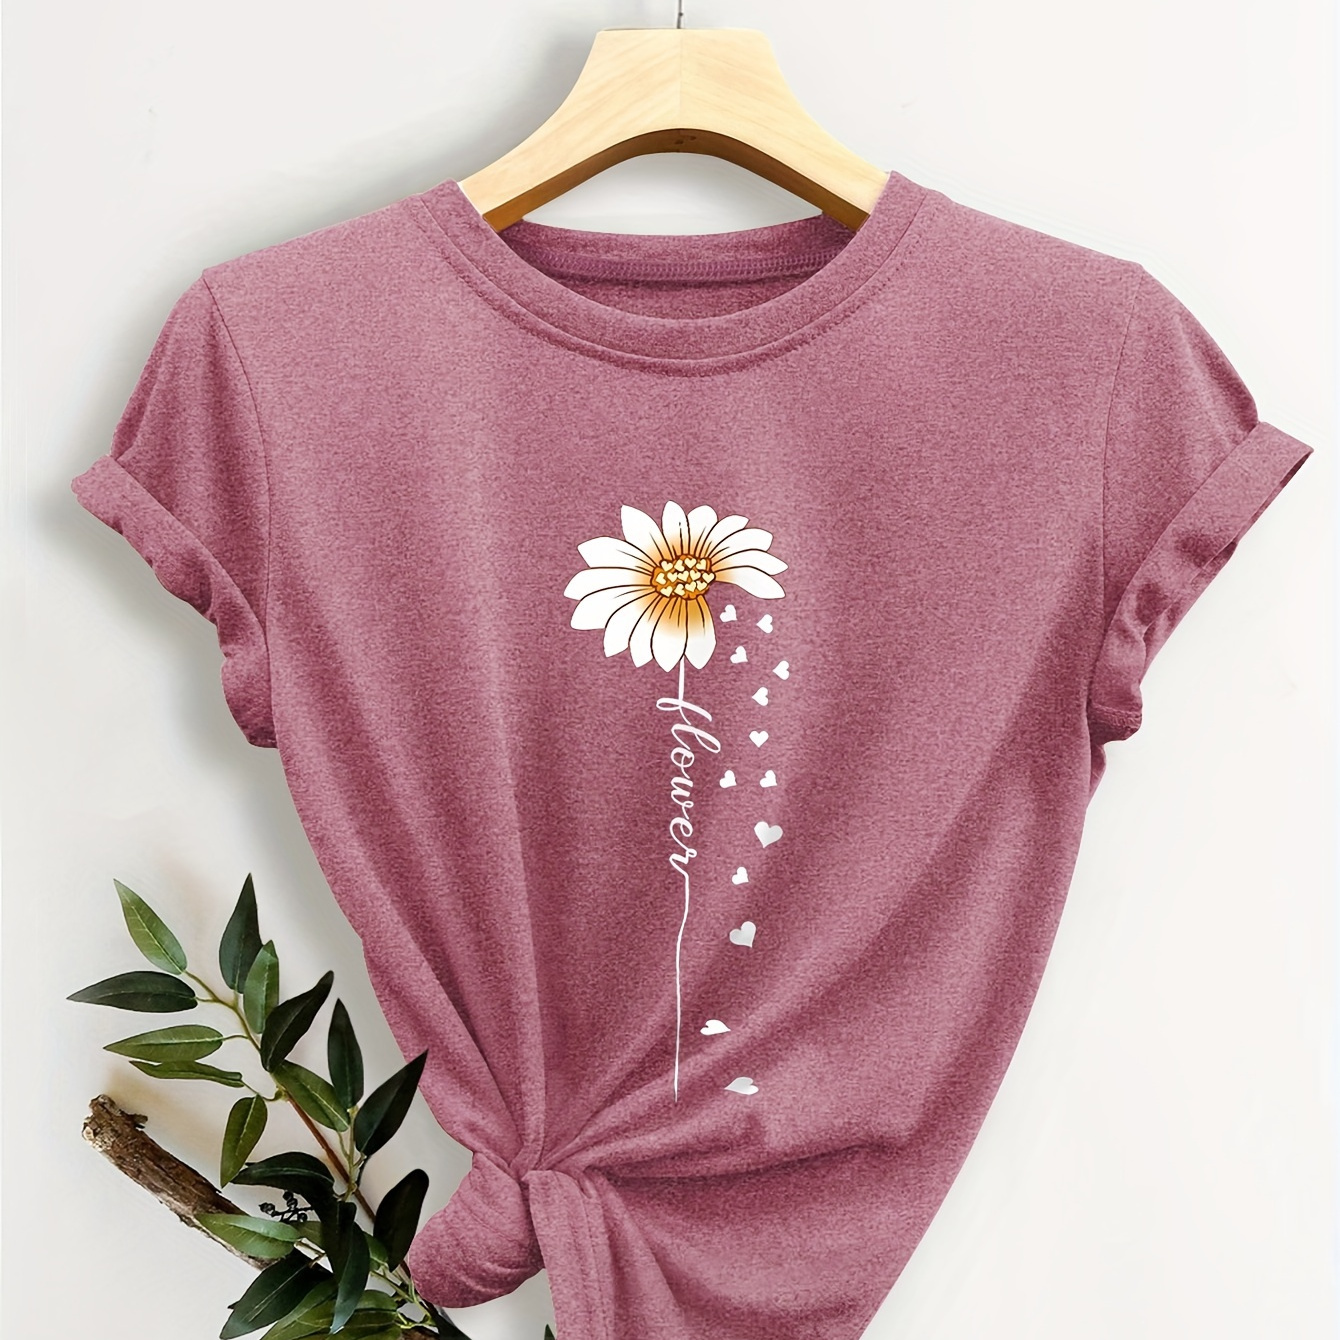 

Lovely Petal Flower Letter Print Graphic Fashion Tee, Retro Style Ladies Summer Casual Sports Style Top, Round Neck Short Sleeve T-shirt